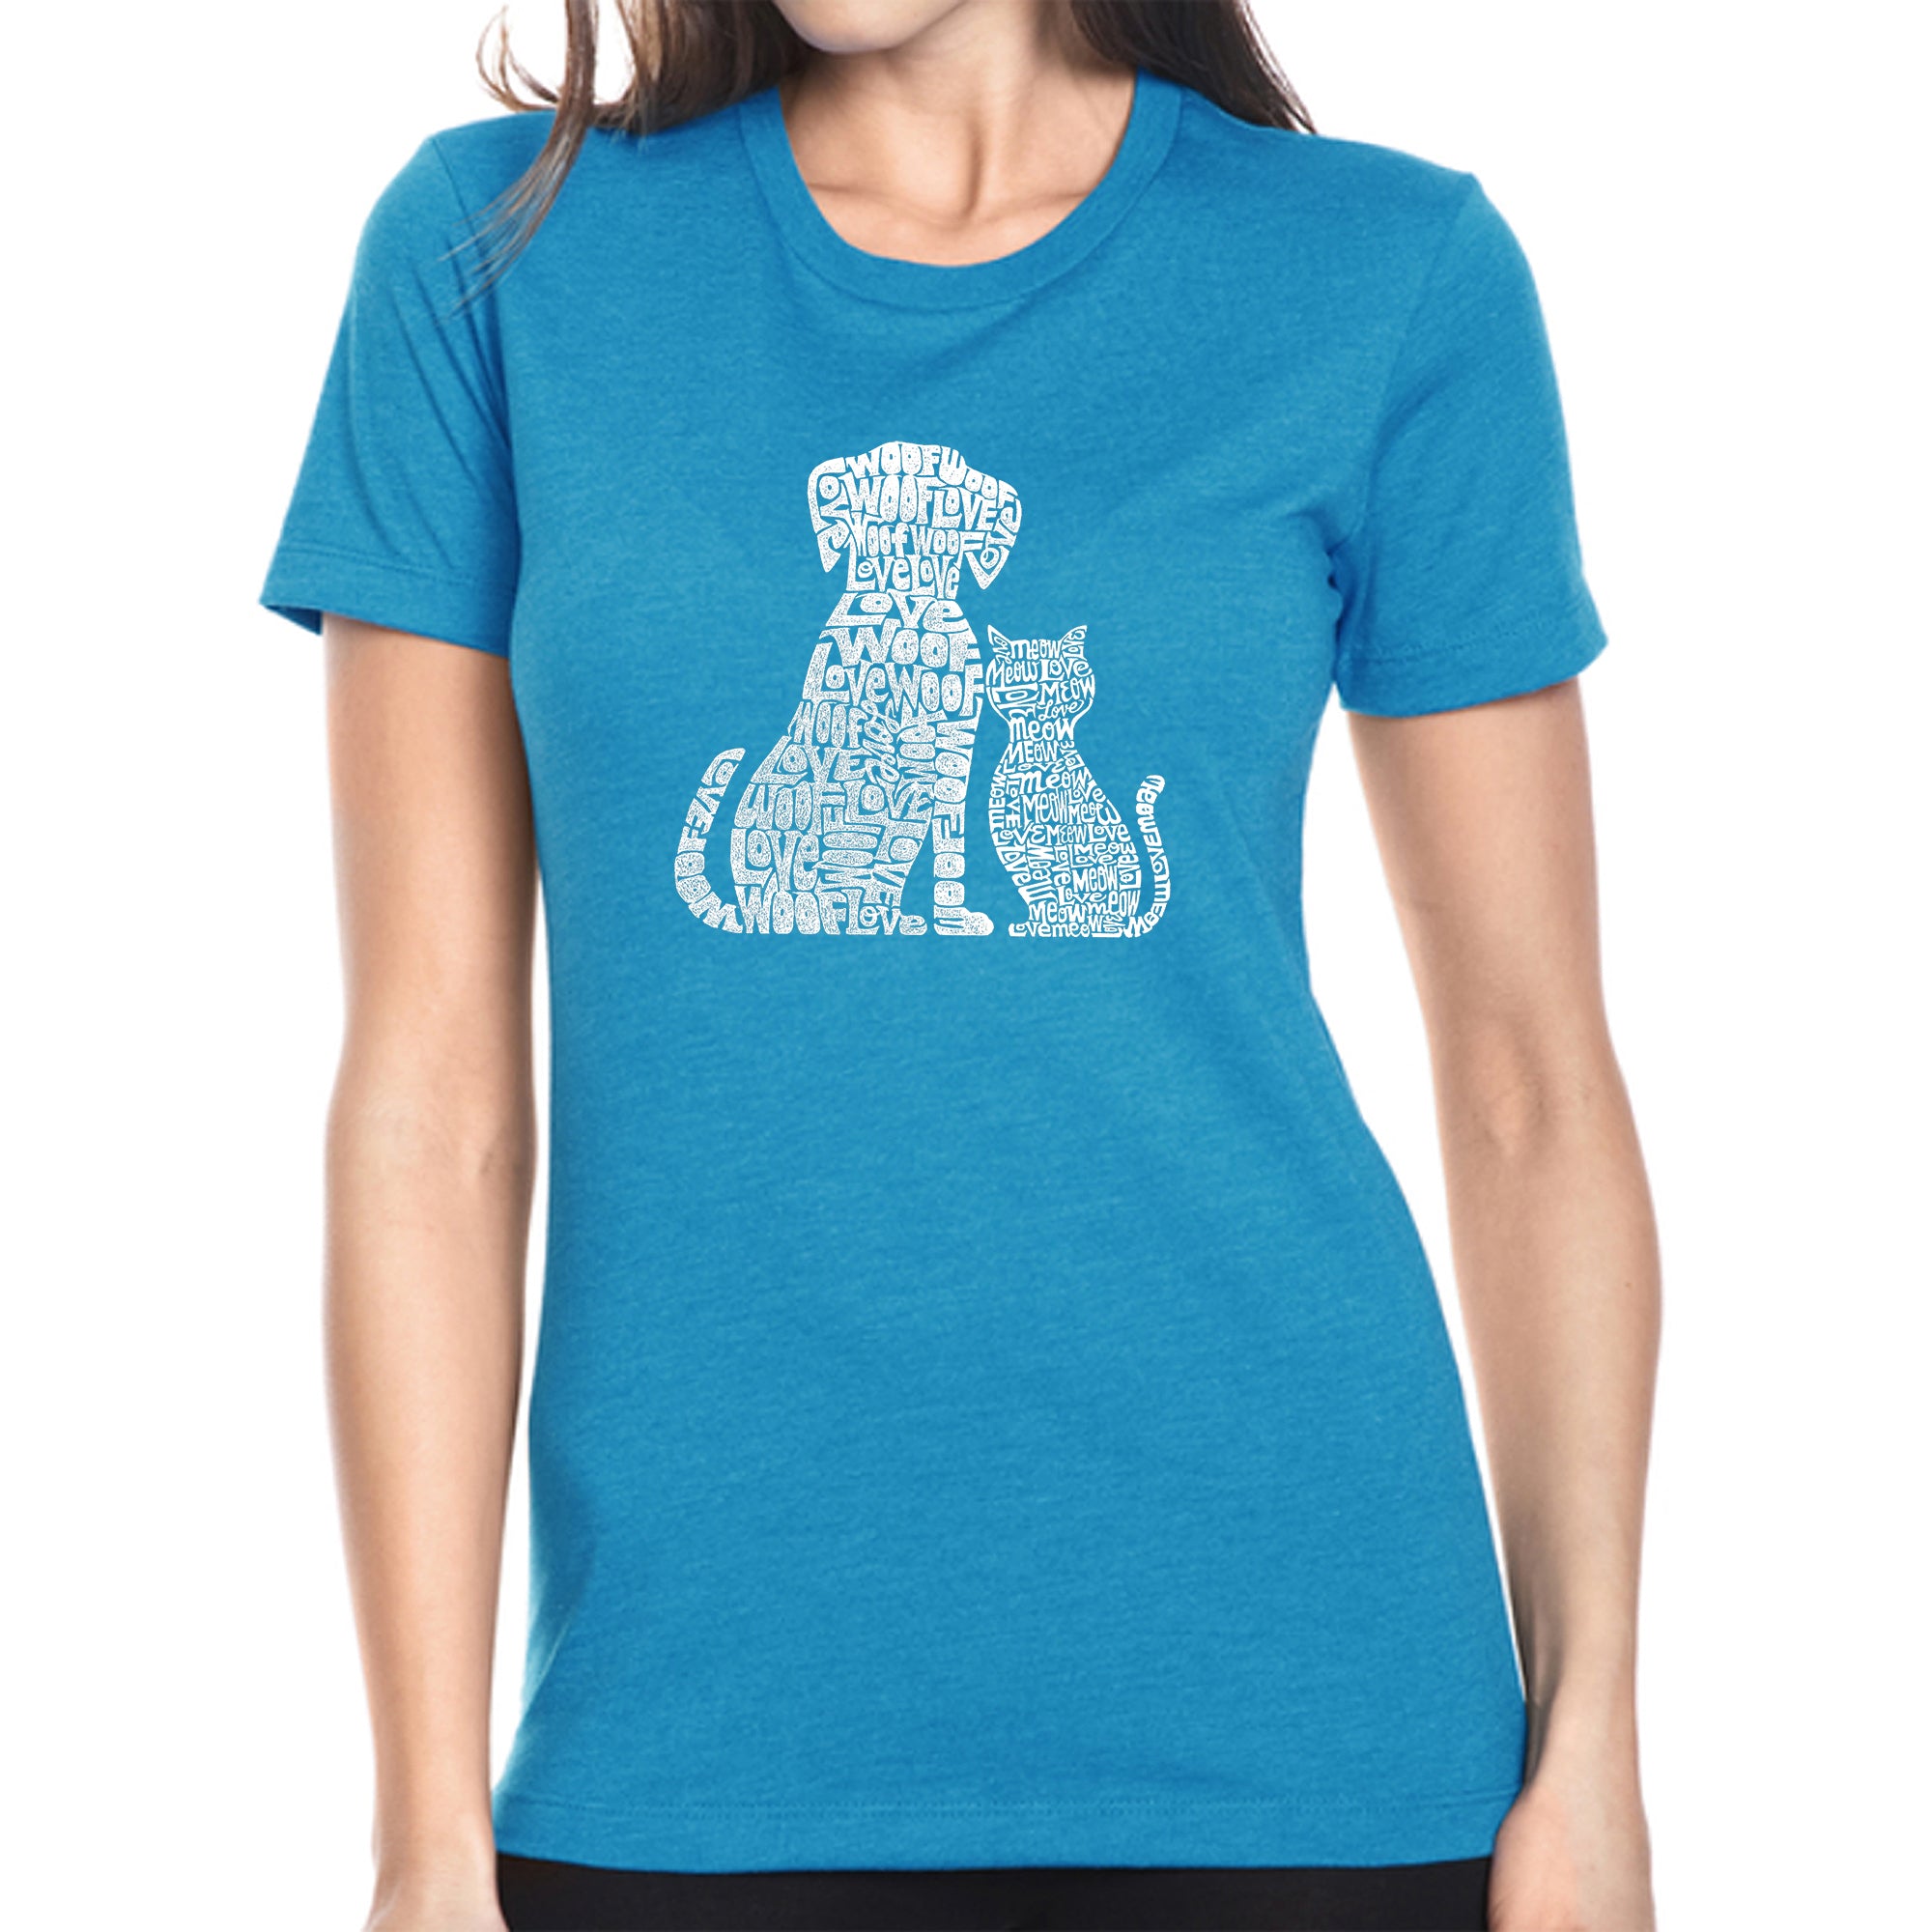 Dogs And Cats - Women's Premium Blend Word Art T-Shirt - Turquoise - X-Large